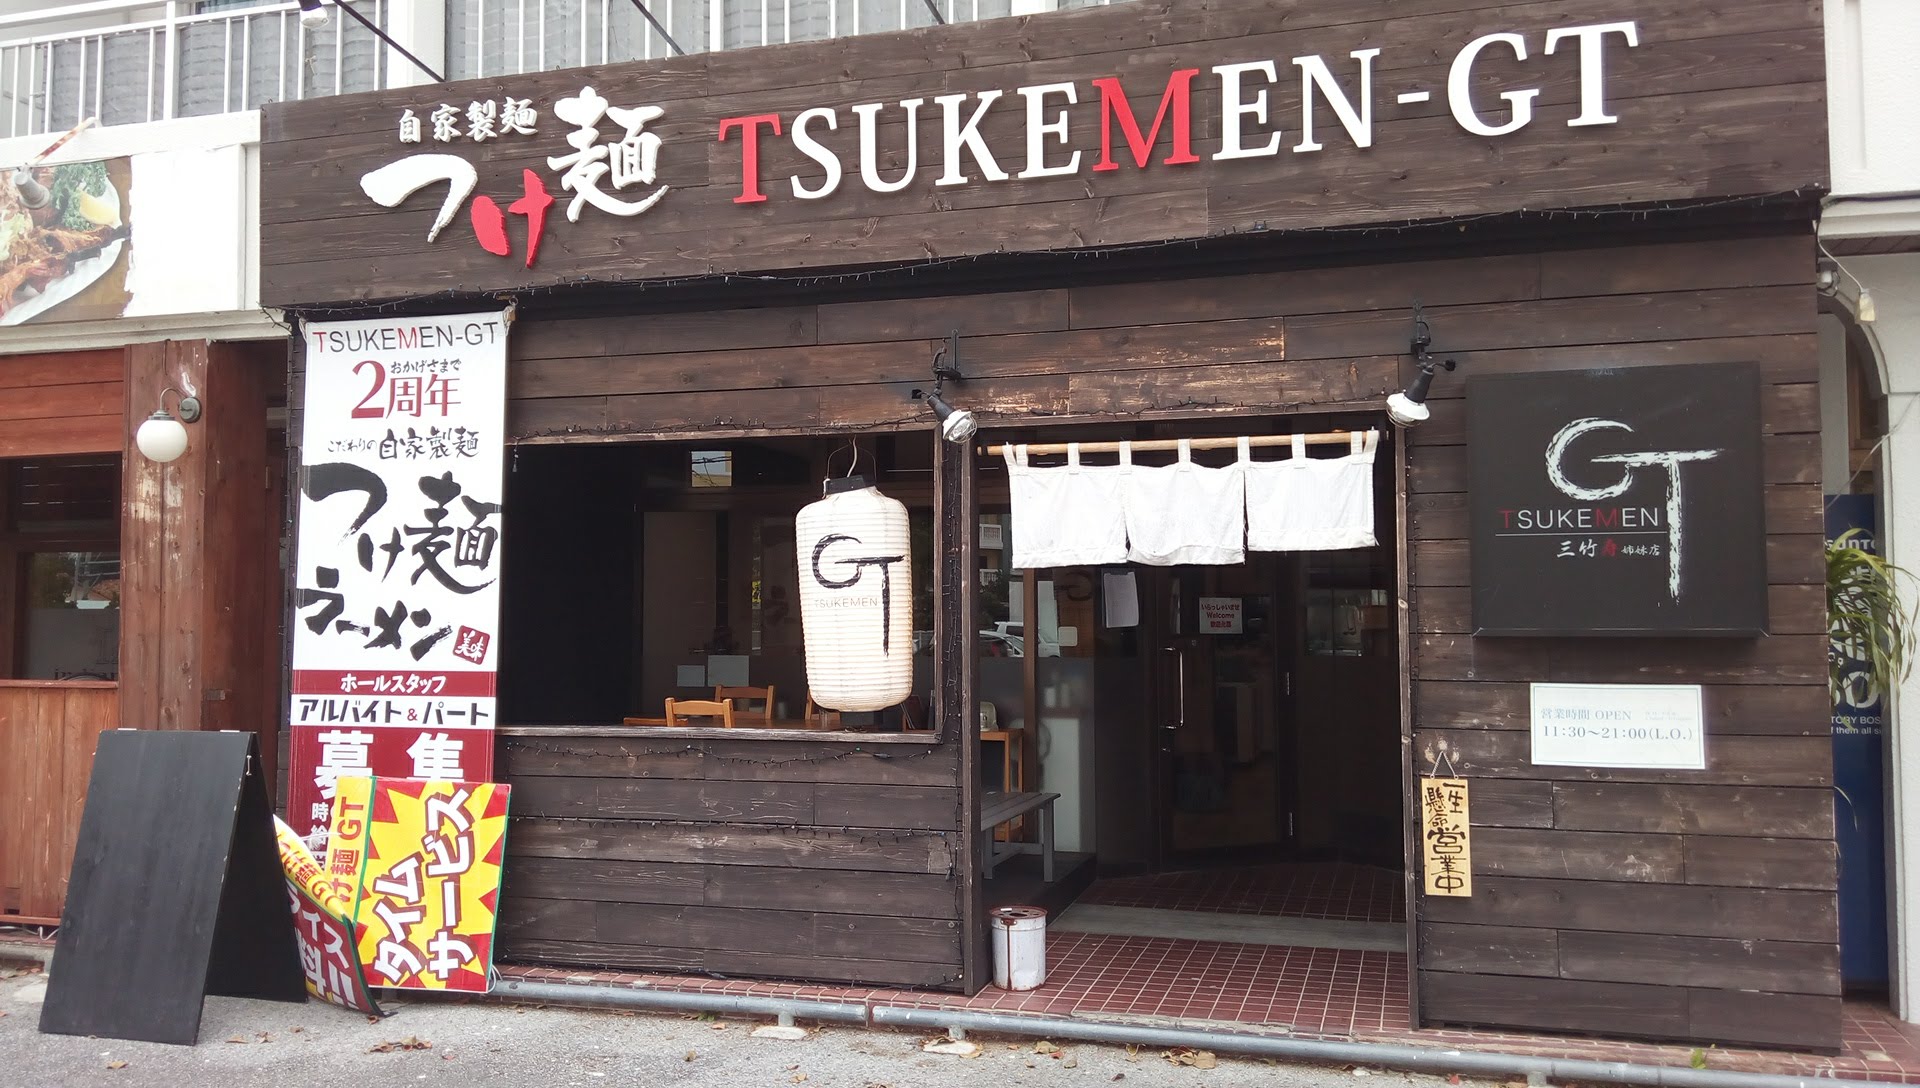 If you want to eat delicious Tsukemen in Chatan town, TSUKEMEN-GT recommends